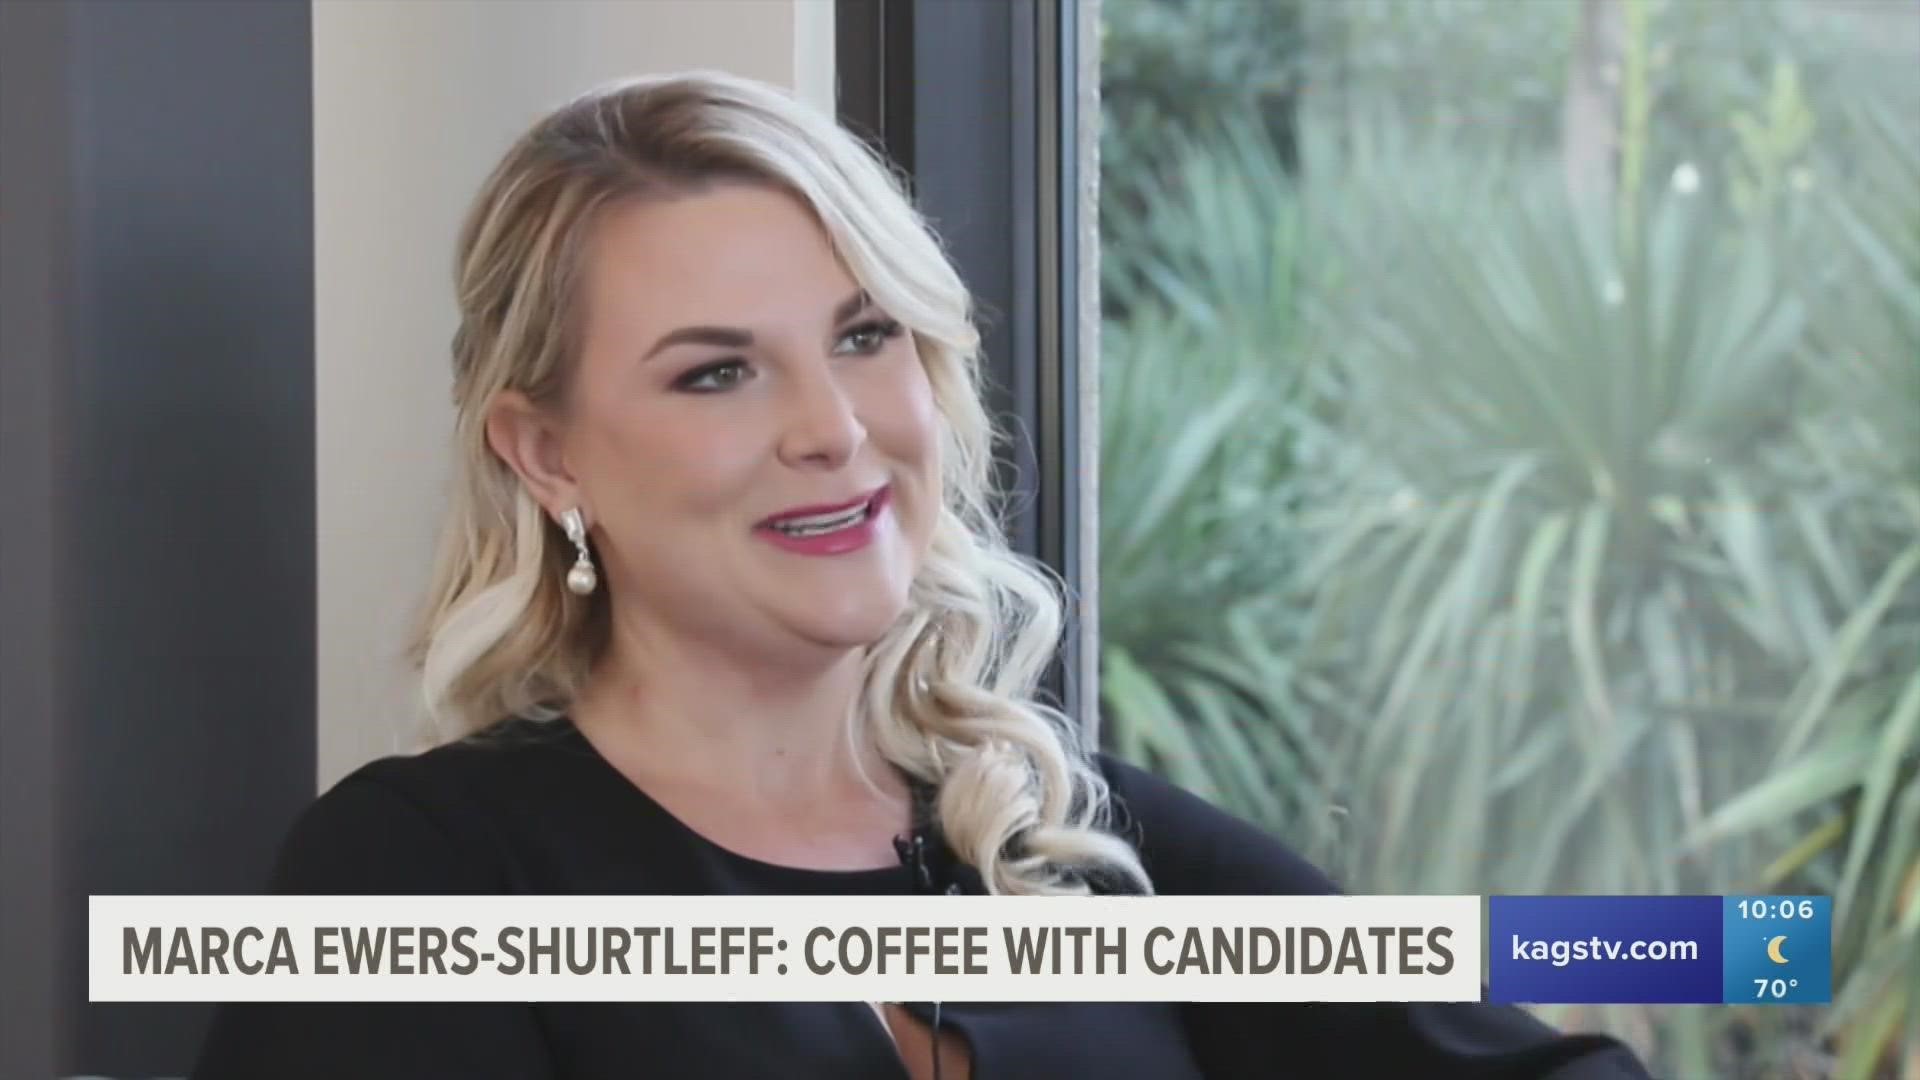 Marca-Ewers Shurtleff is a lawyer in Bryan who has served on several boards. Now, she's running for District 5 on the Bryan City Council.